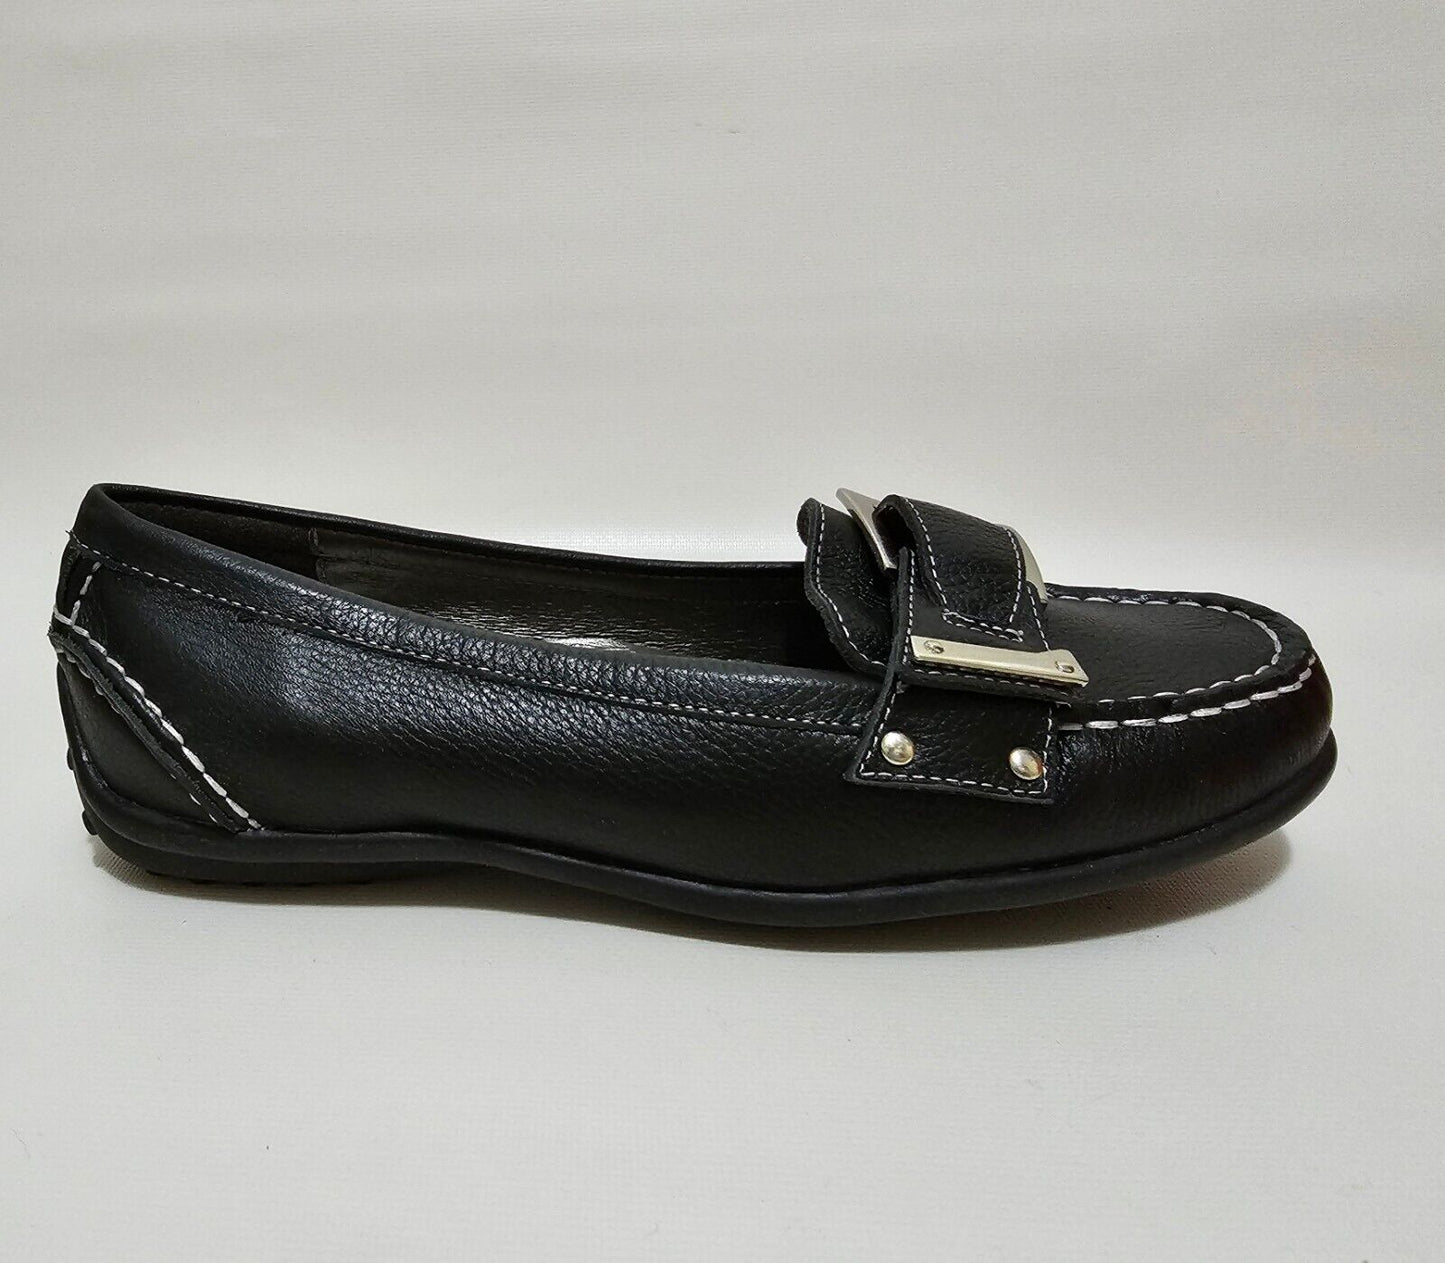 Renalison Black Leather Slip-on Casual Loafer Shoes Womens Size US 7